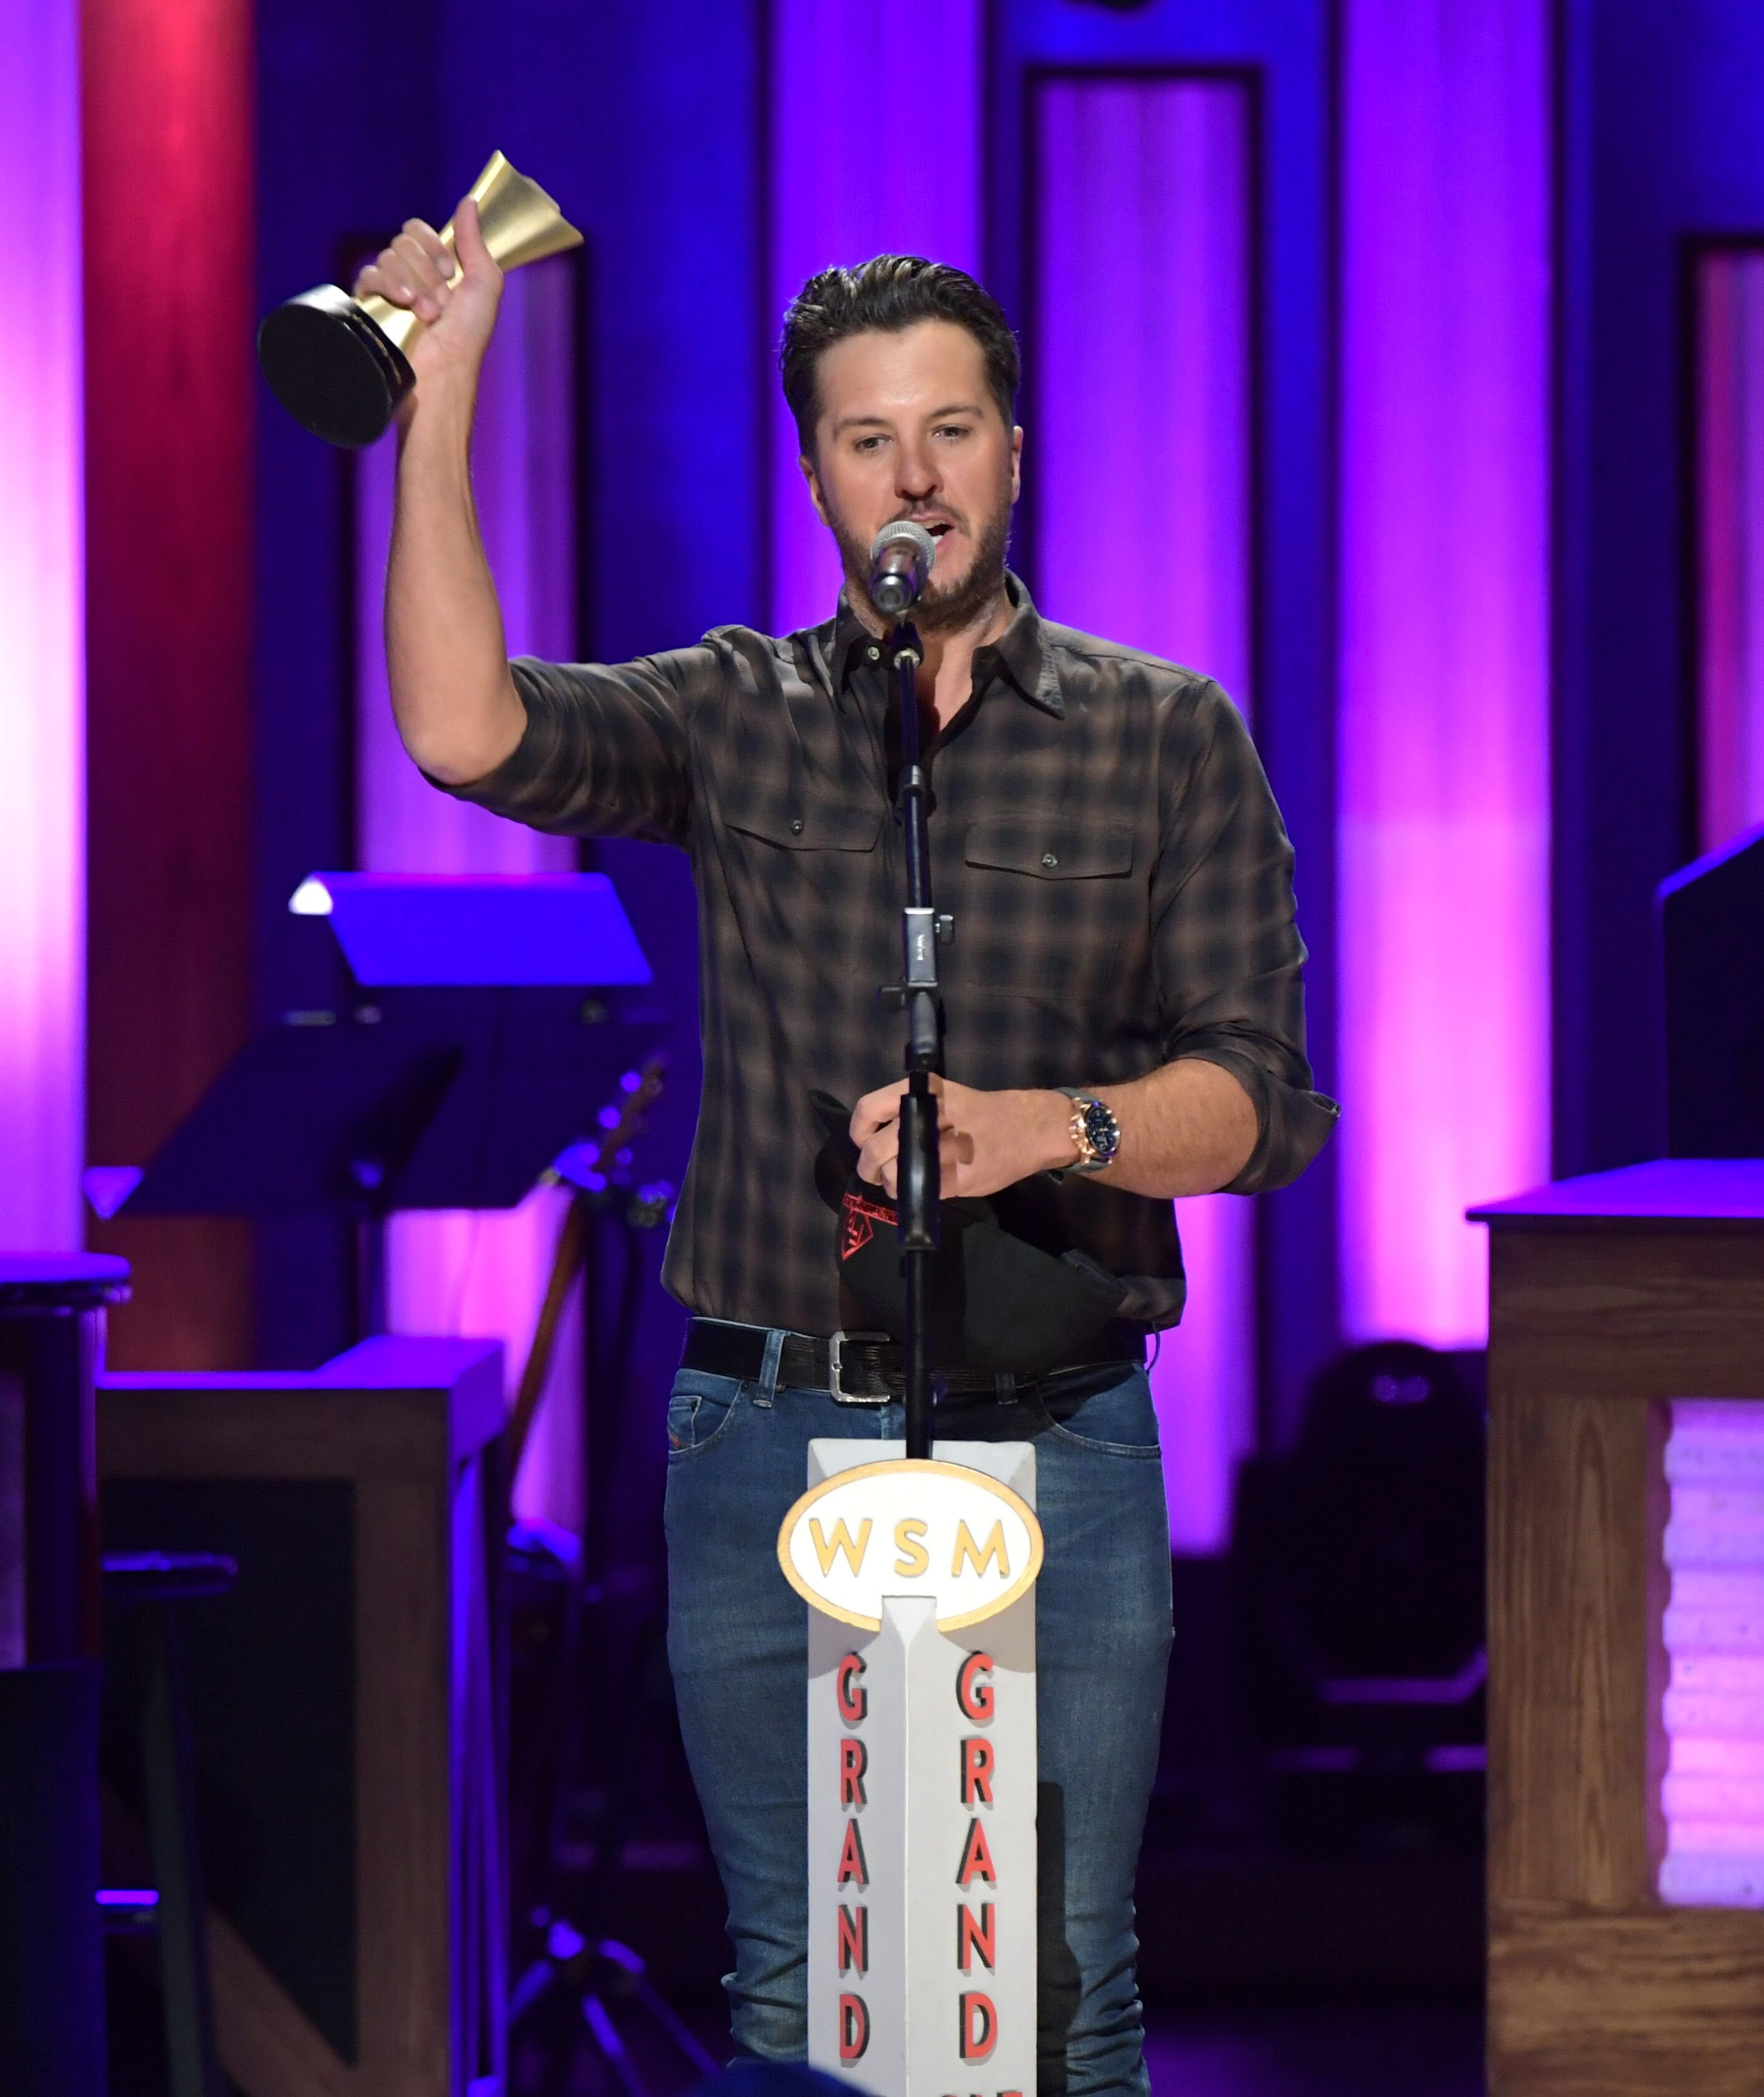  Luke Bryan receives an Artist of the Decade award at the Grand Ole Opry House on October 22, 2019 in Nashville, Tennessee. | Source: Getty Images